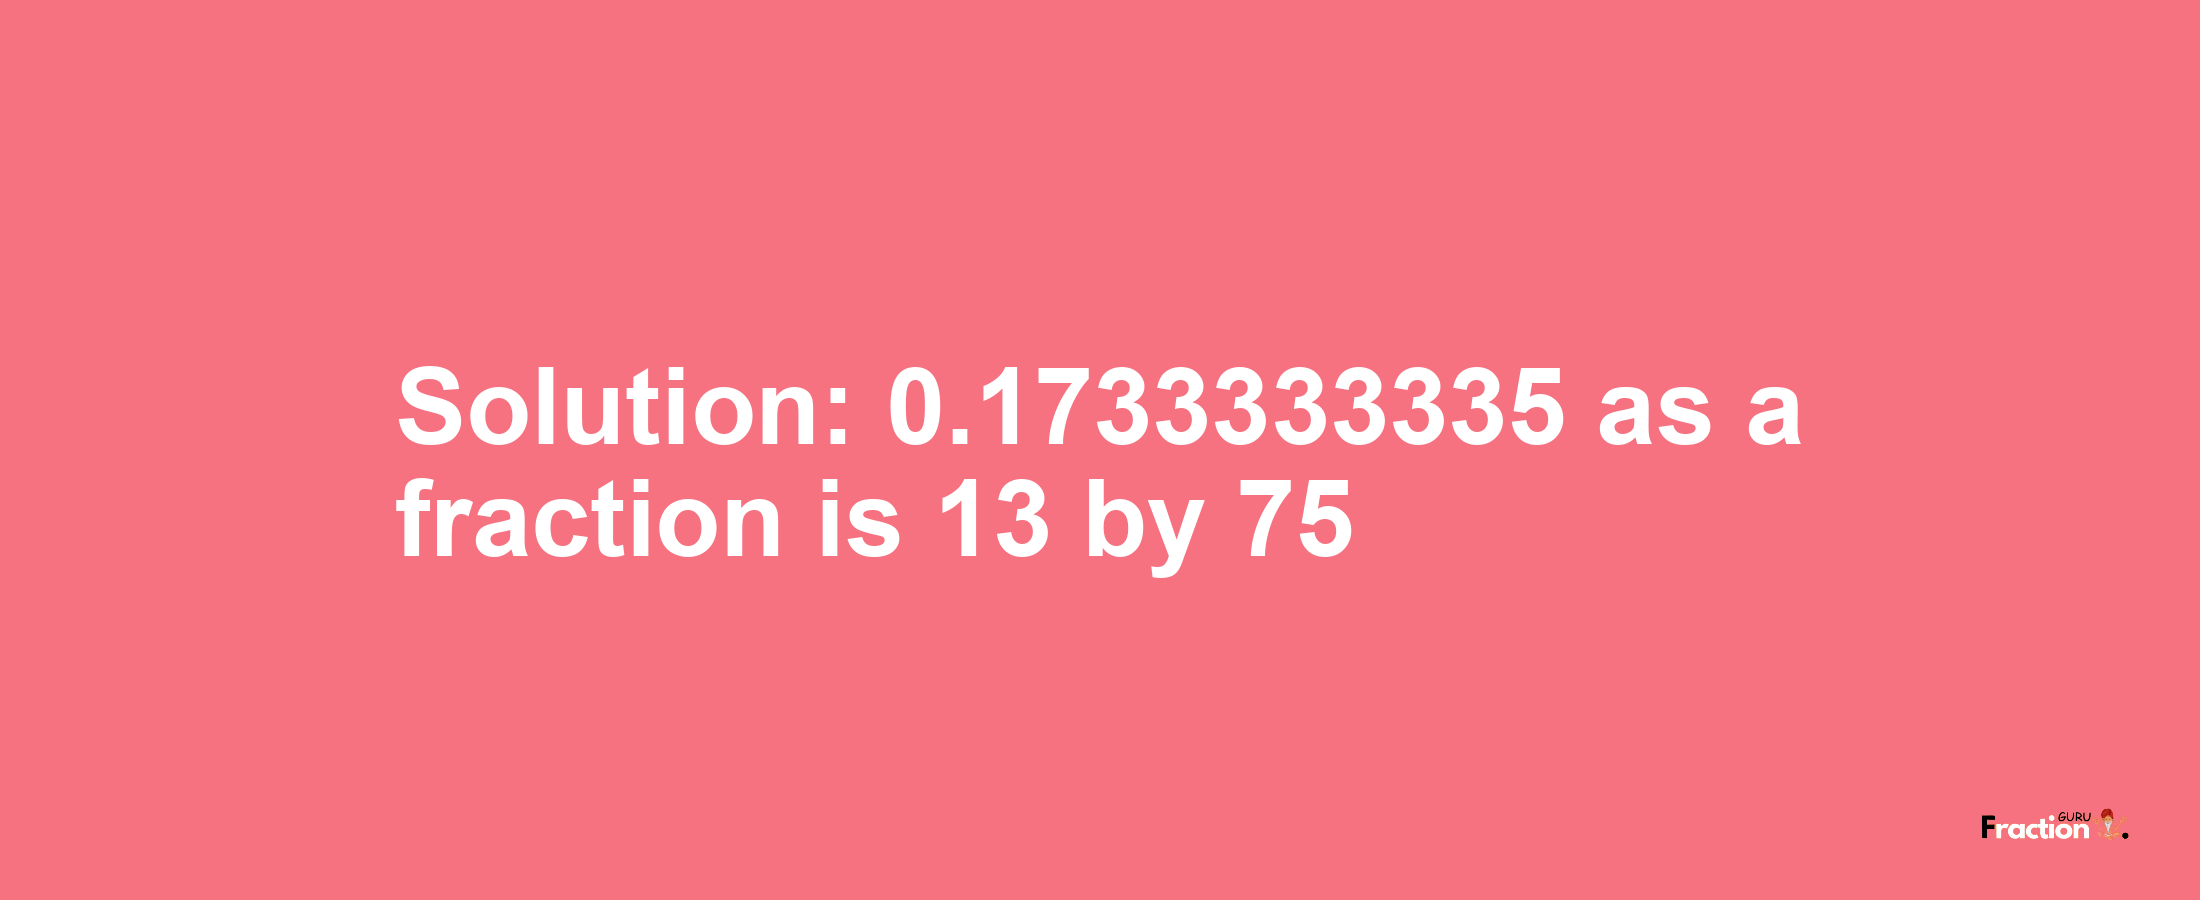 Solution:0.1733333335 as a fraction is 13/75